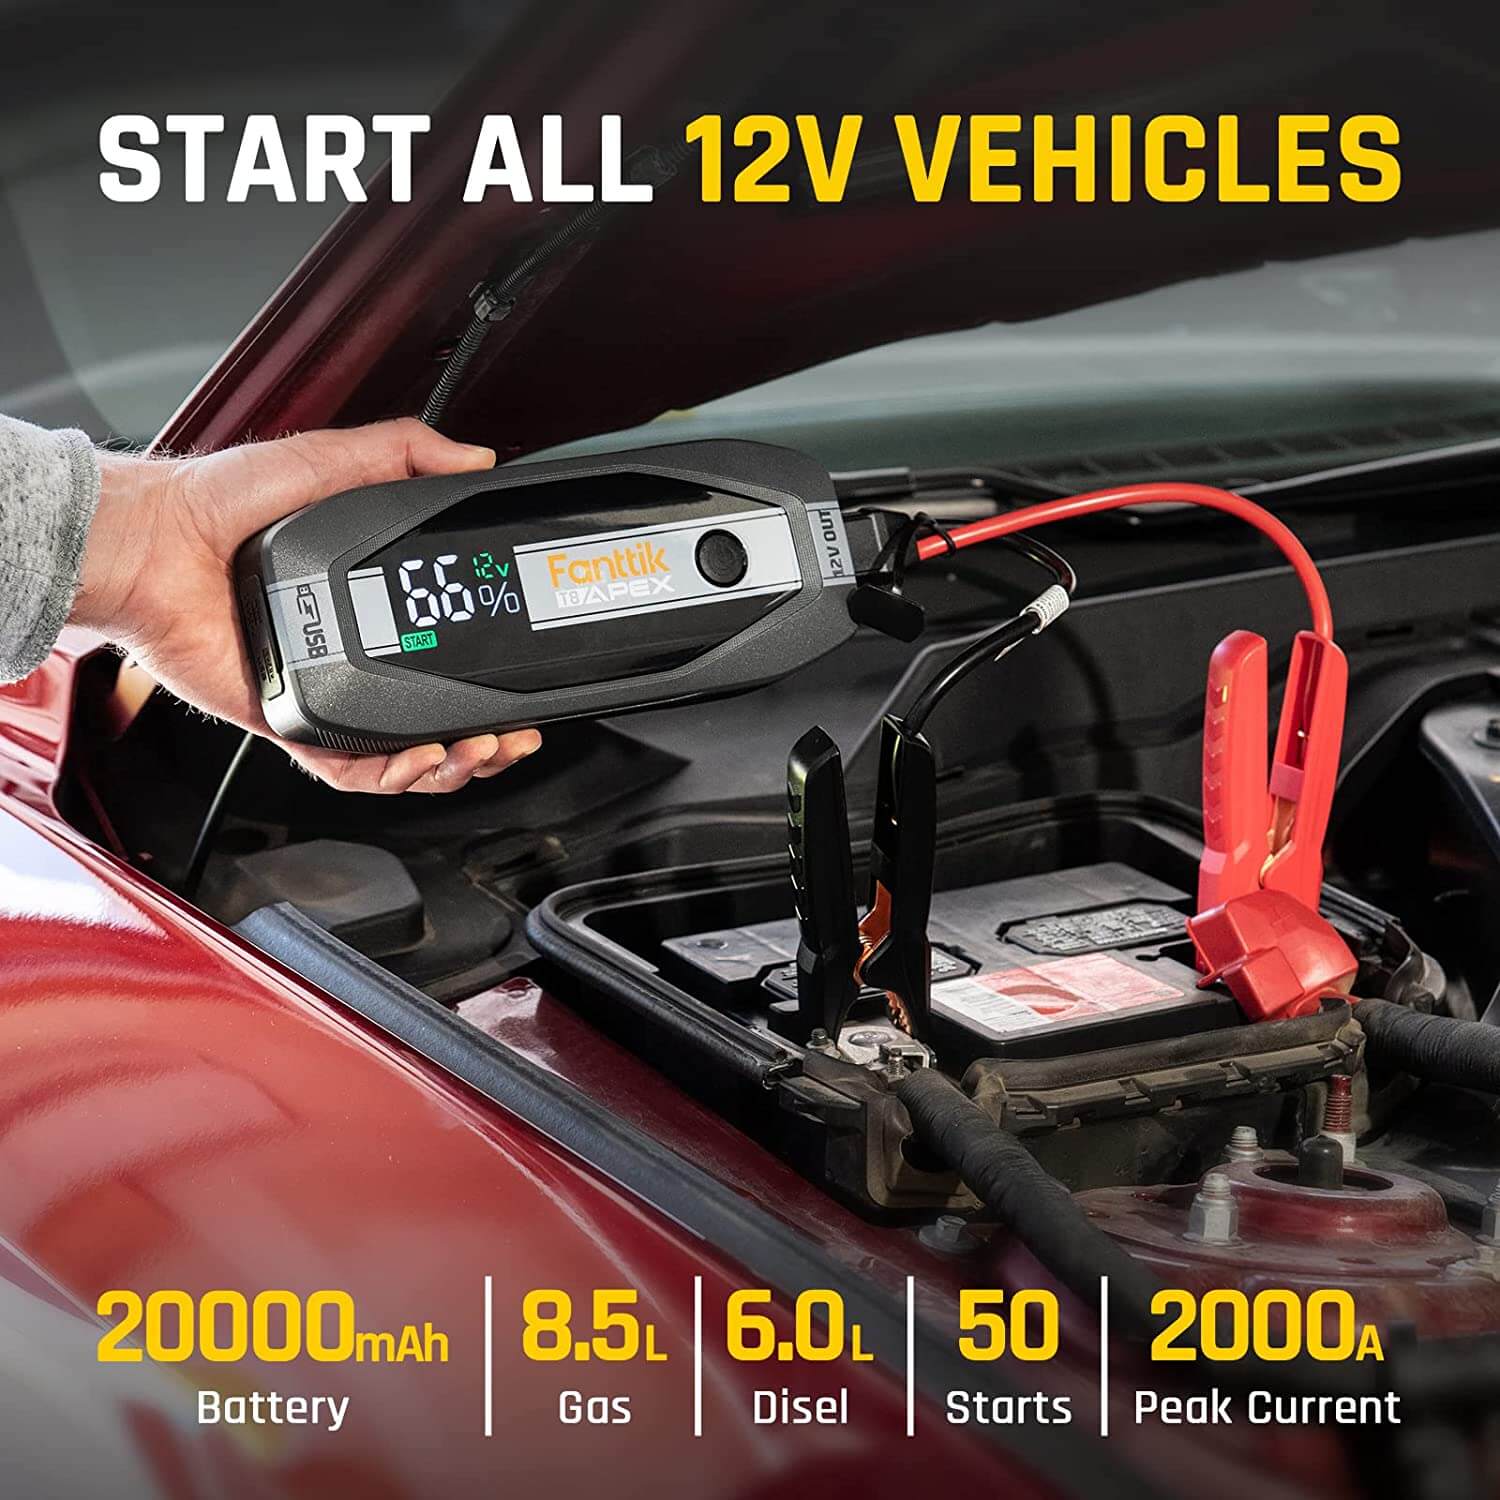 Fanttik Jump Starter could start all 12V vehicles, 2000 amp peak current allows jumping start up to 8.5L Gas / 6.0L Diesel vehicles. It can achieve 50 times jump-start with 20000 mAh battery capacity when fully charged.